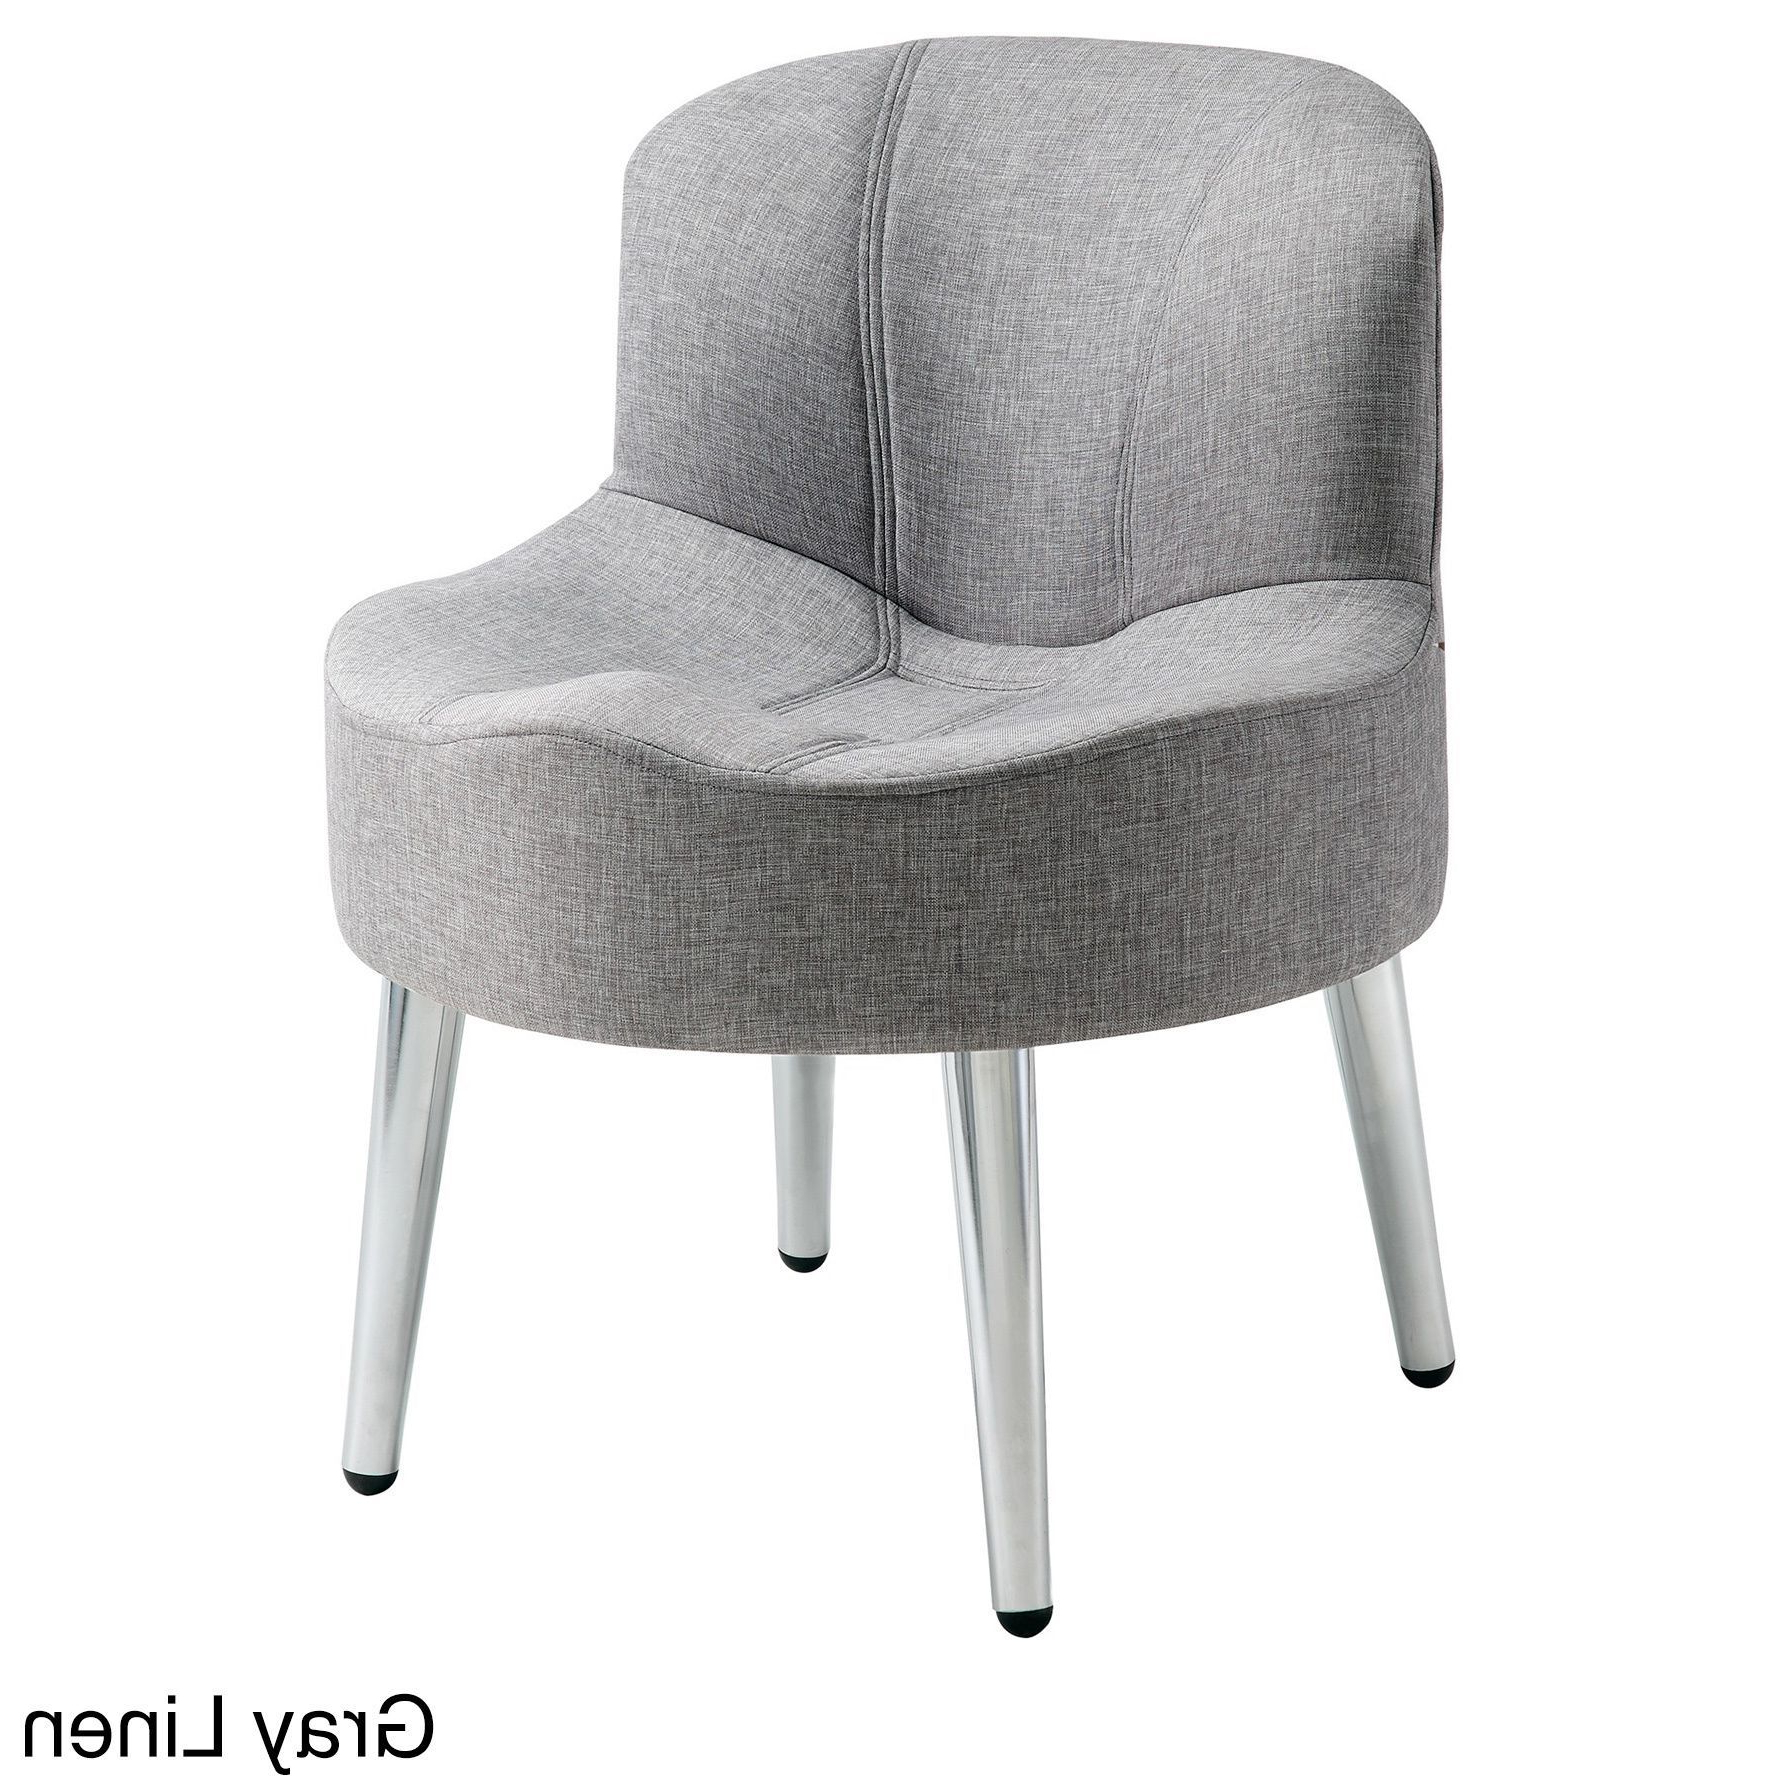 Chill Swivel Chairs With Metal Base